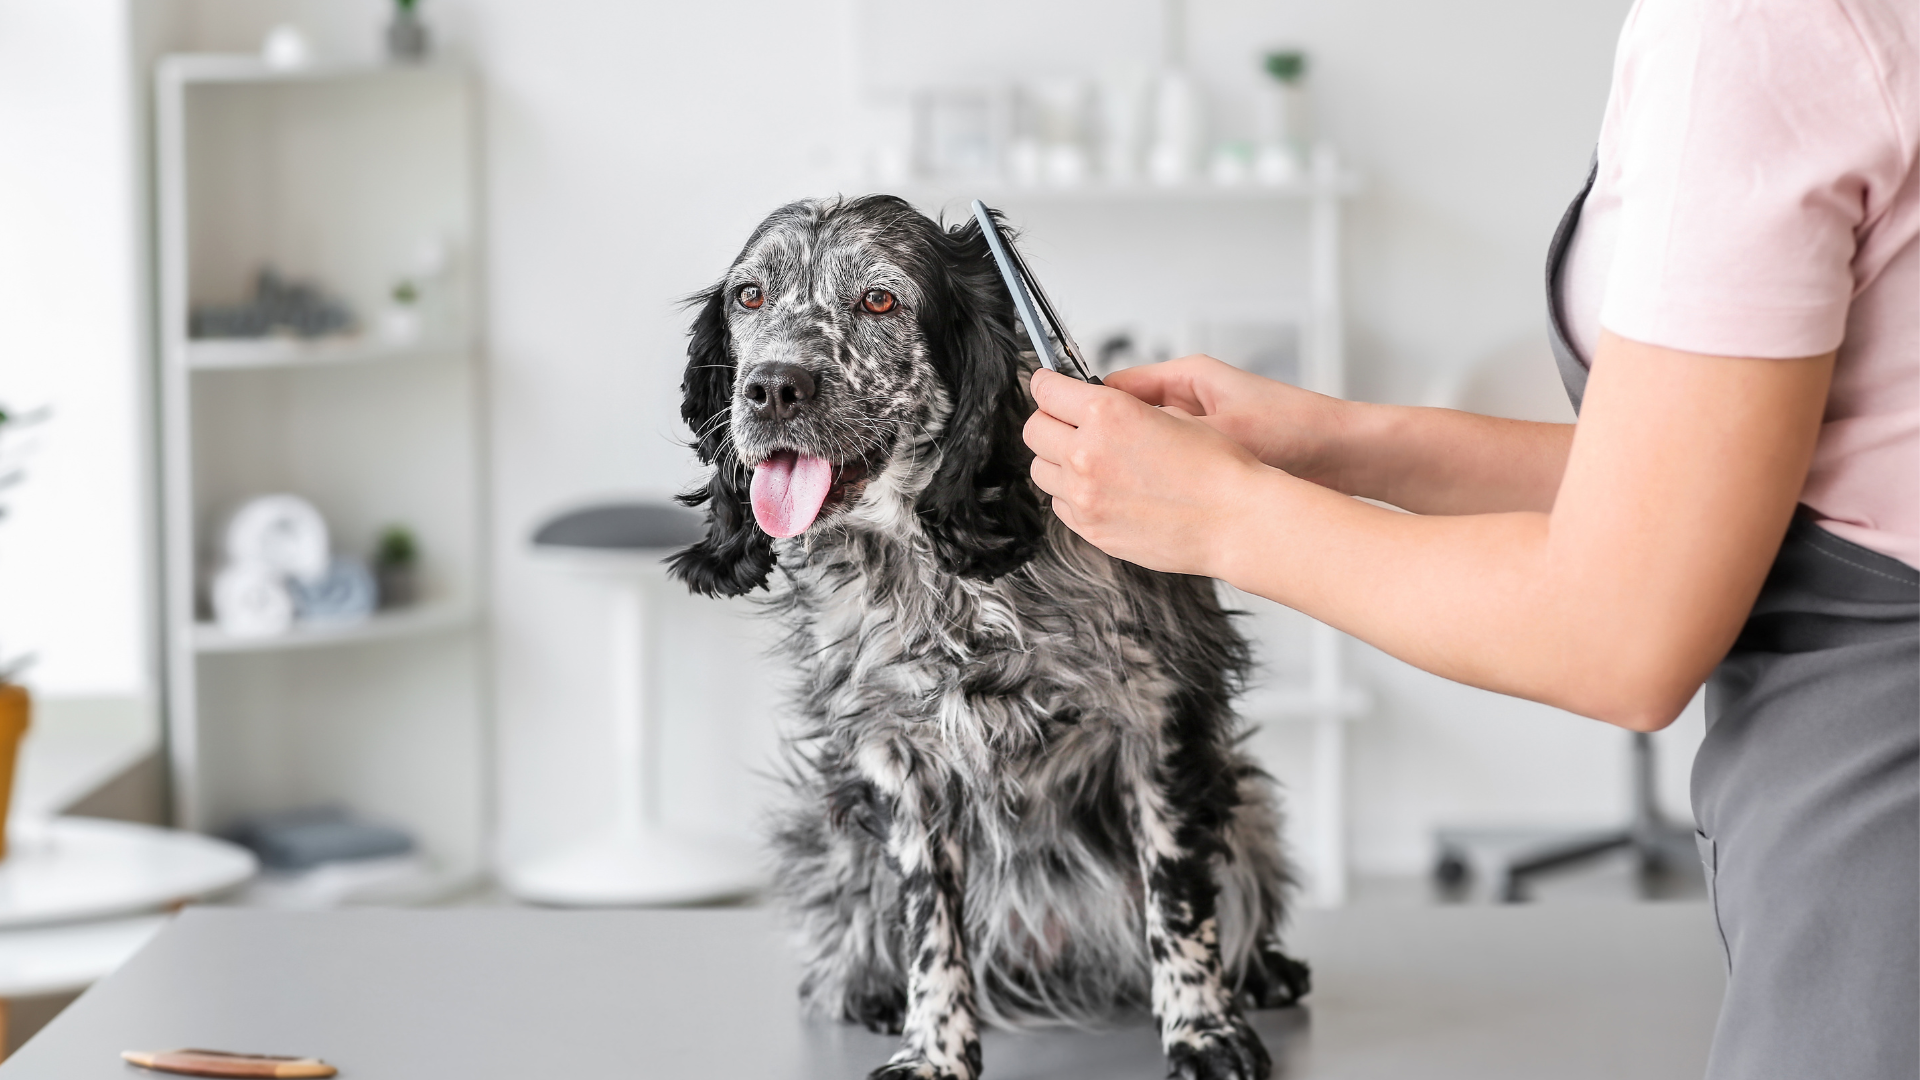 A Dog Groomer clipping a Black and White Spotted Dog